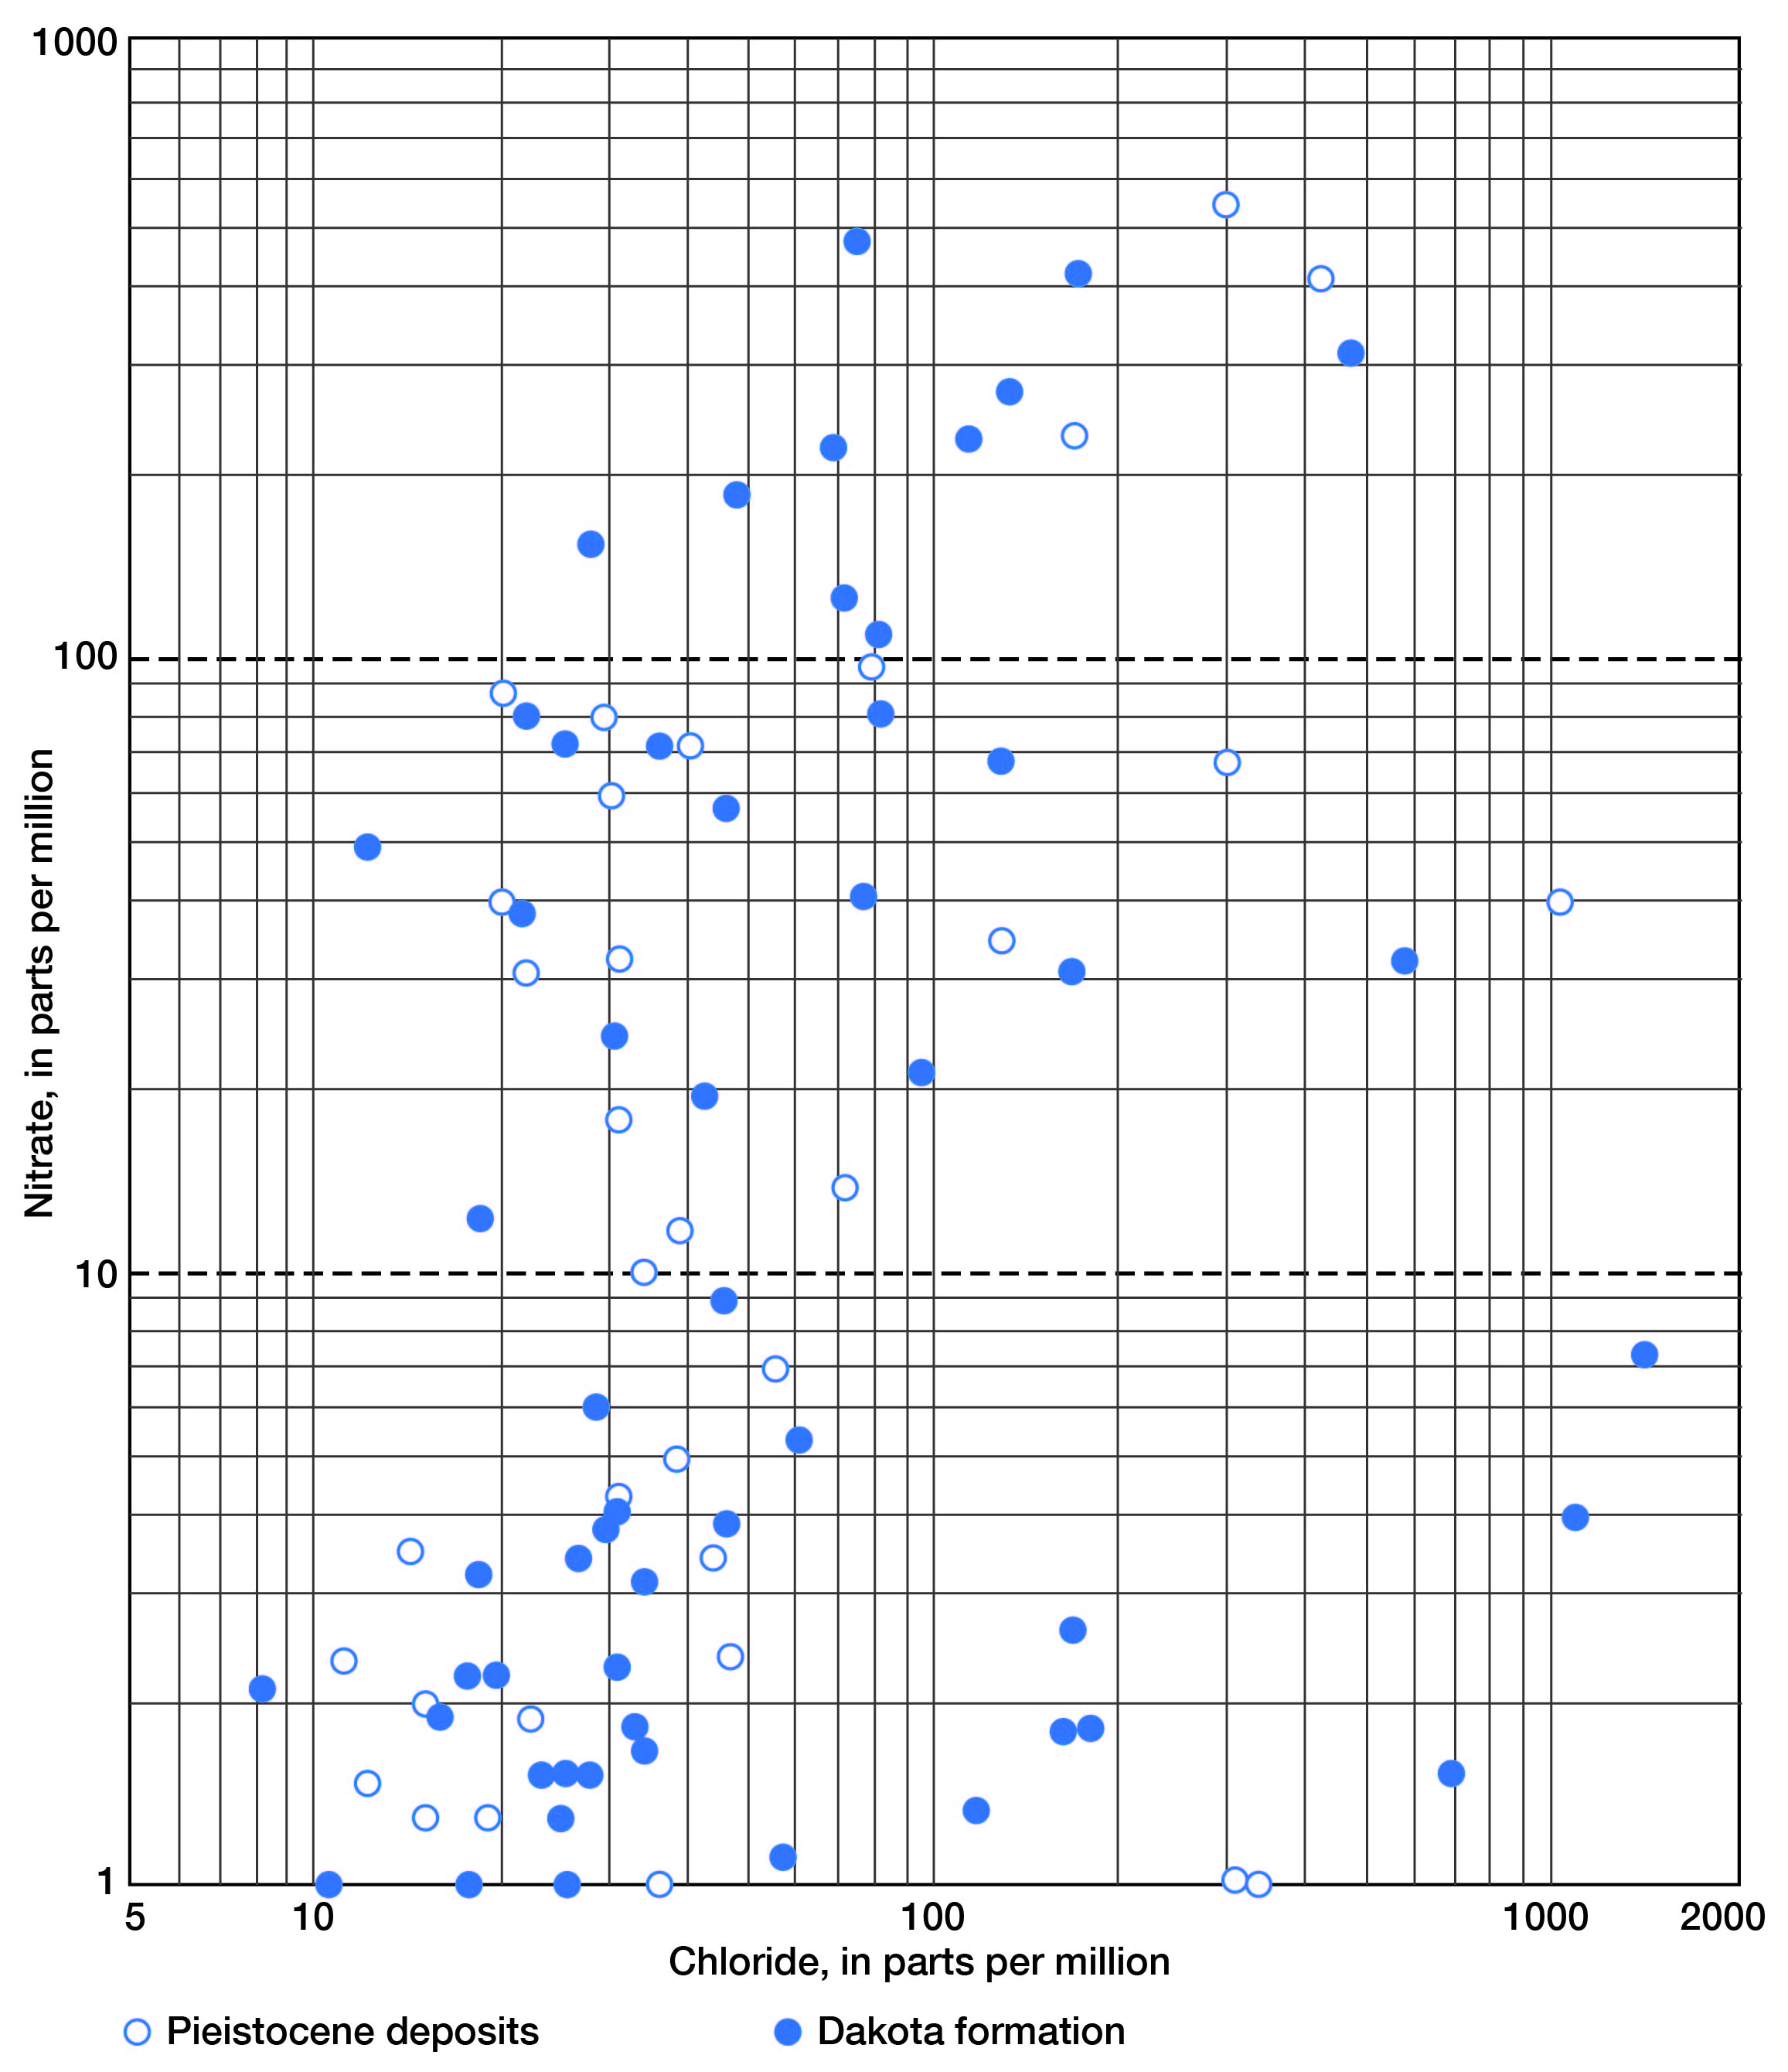 Nitrate plotted against chloride on a log-log plot; not a strong relationship between them; Pleistocene and Dakota samples scattered throughout plot as well.